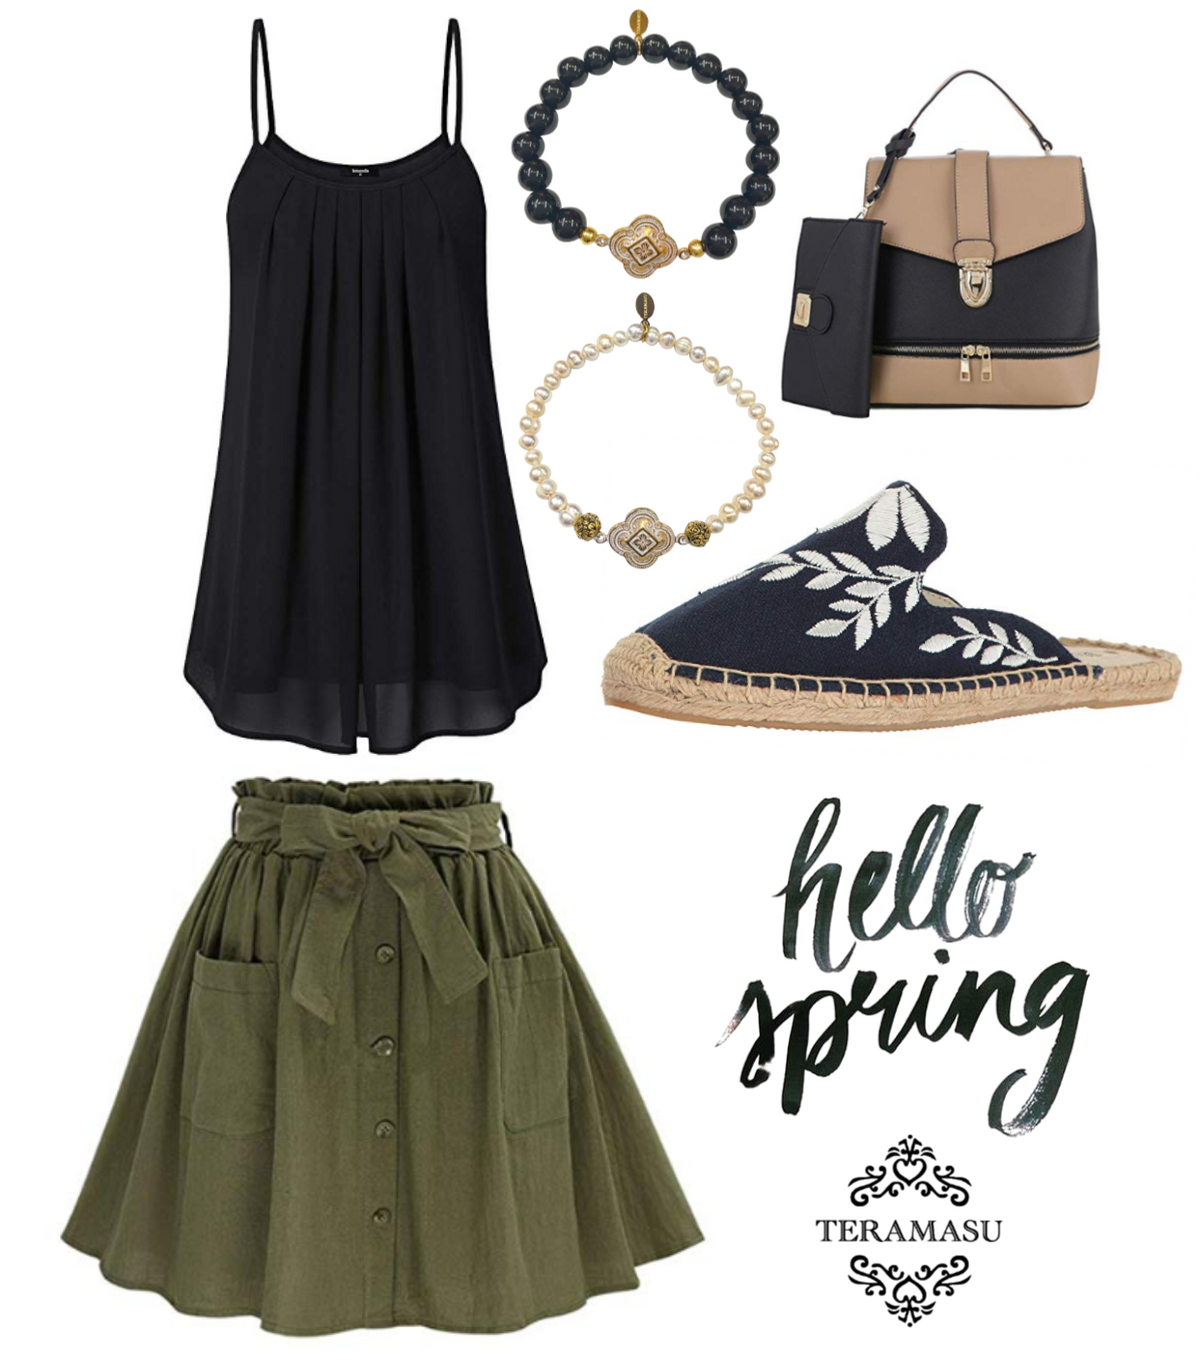 Living Ladylike: Bold Black and White Spring Outfit Inspiration for Your One-of-a-Kind Style from Teramasu